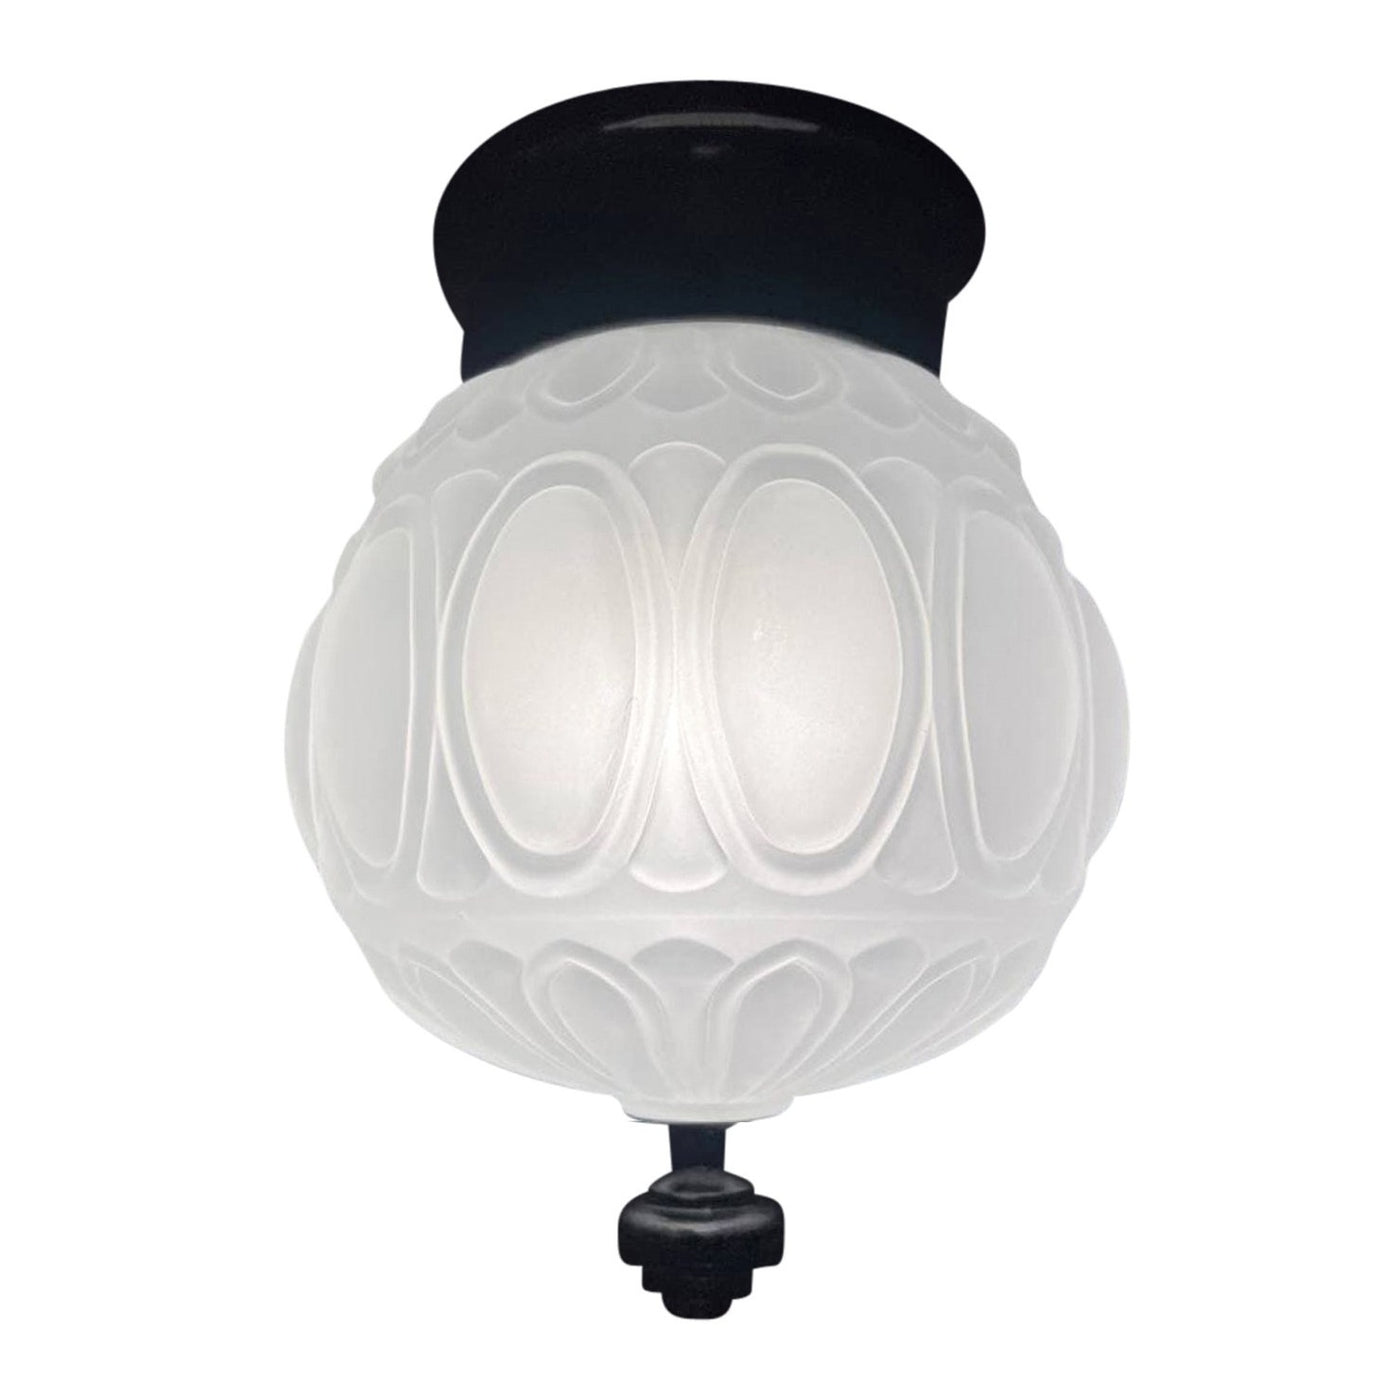 Colonial Style Glass Shade Overhead Ceiling Light Fixture (Flat Black Finish)